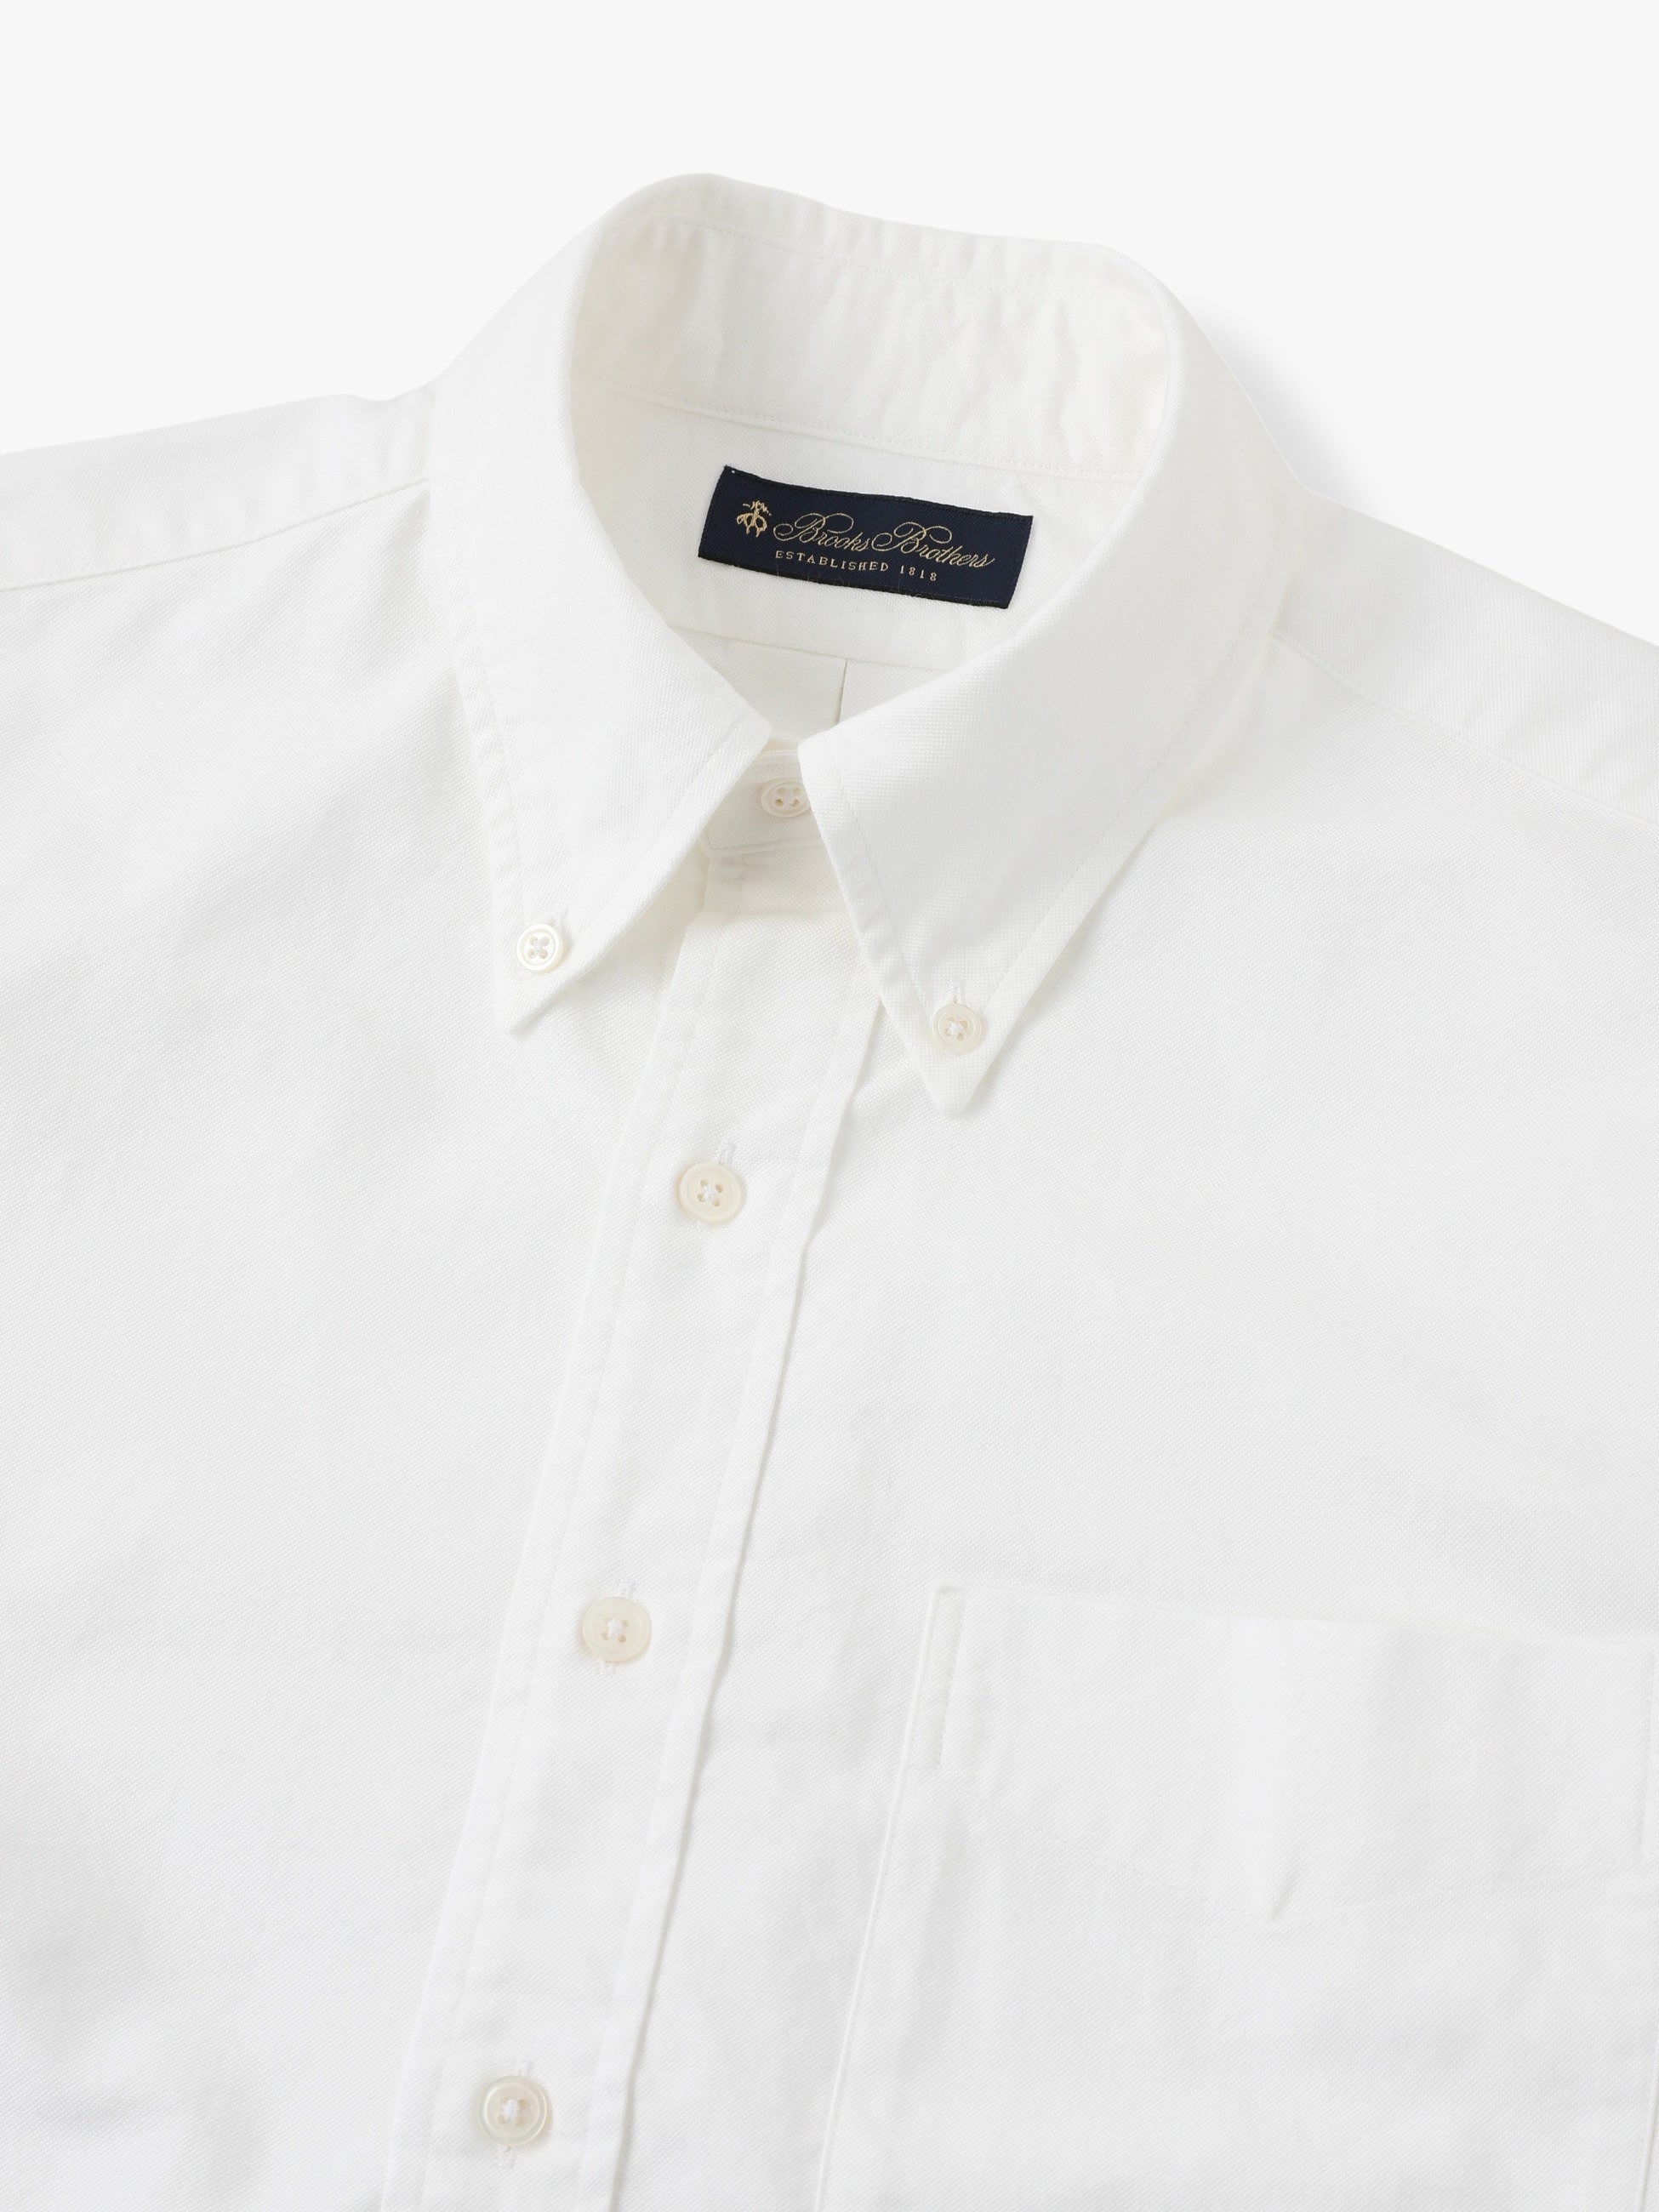 Brooks Brothers Square Tail Oxford Shirt